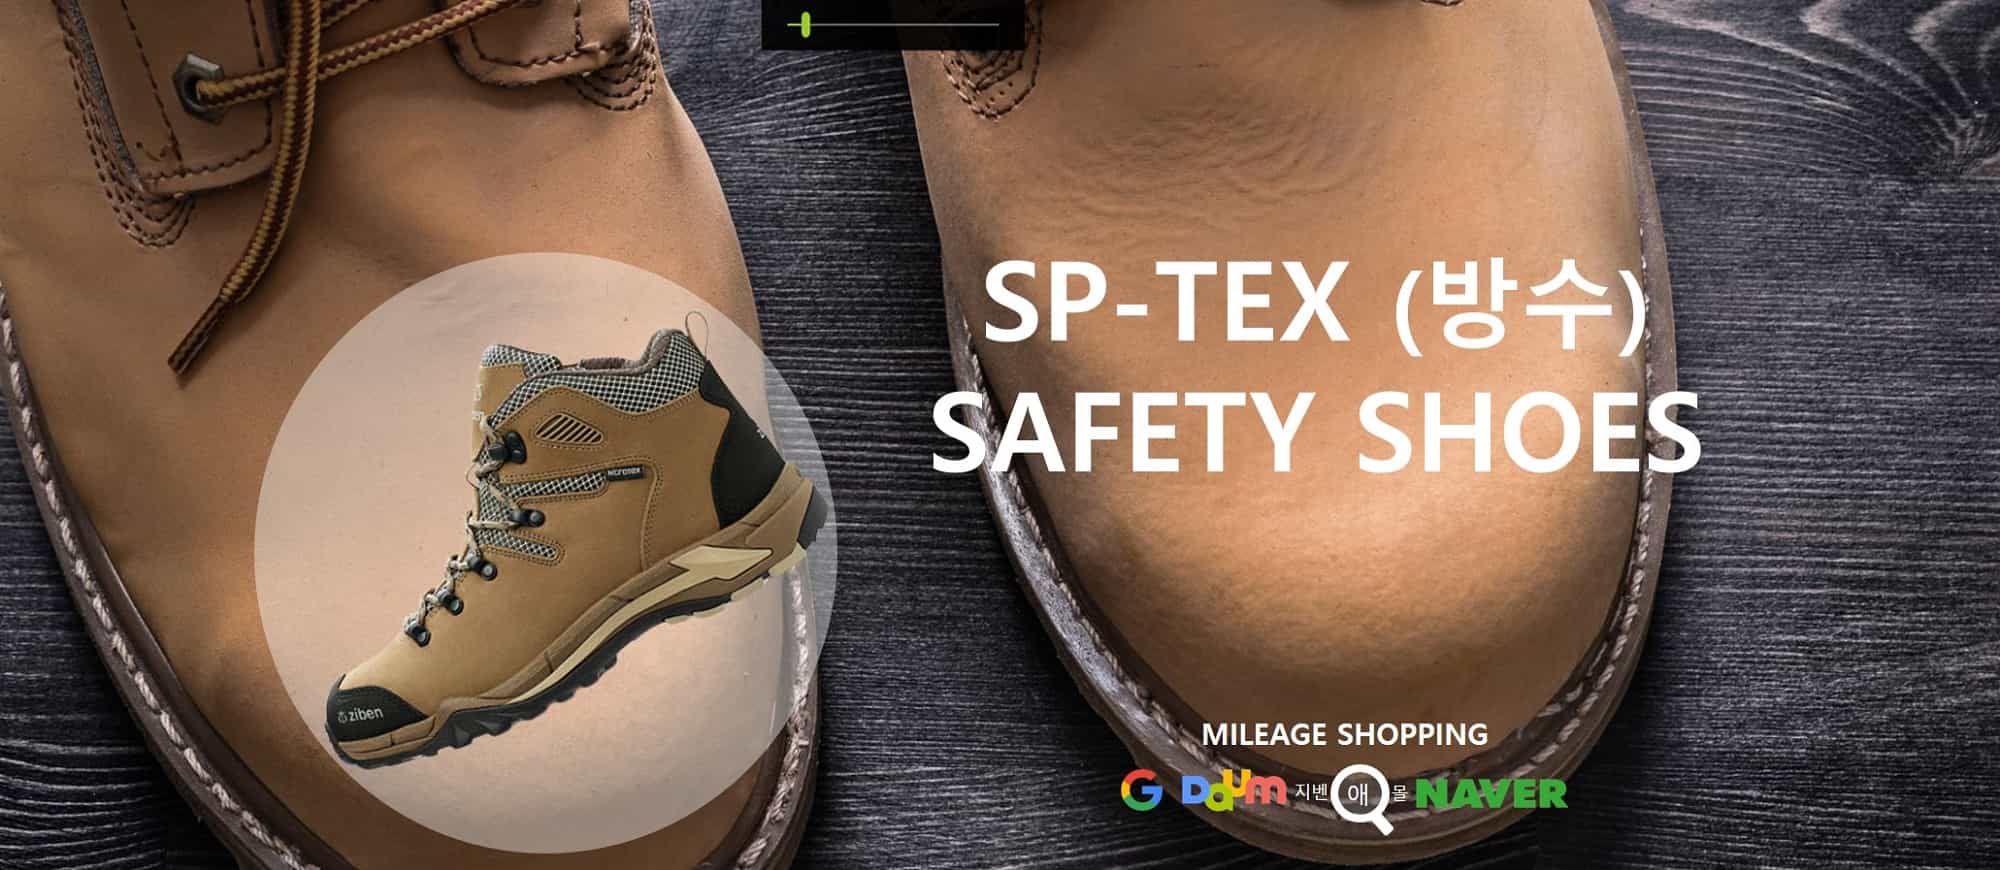 SP-TEX (방수)  SAFETY SHOES